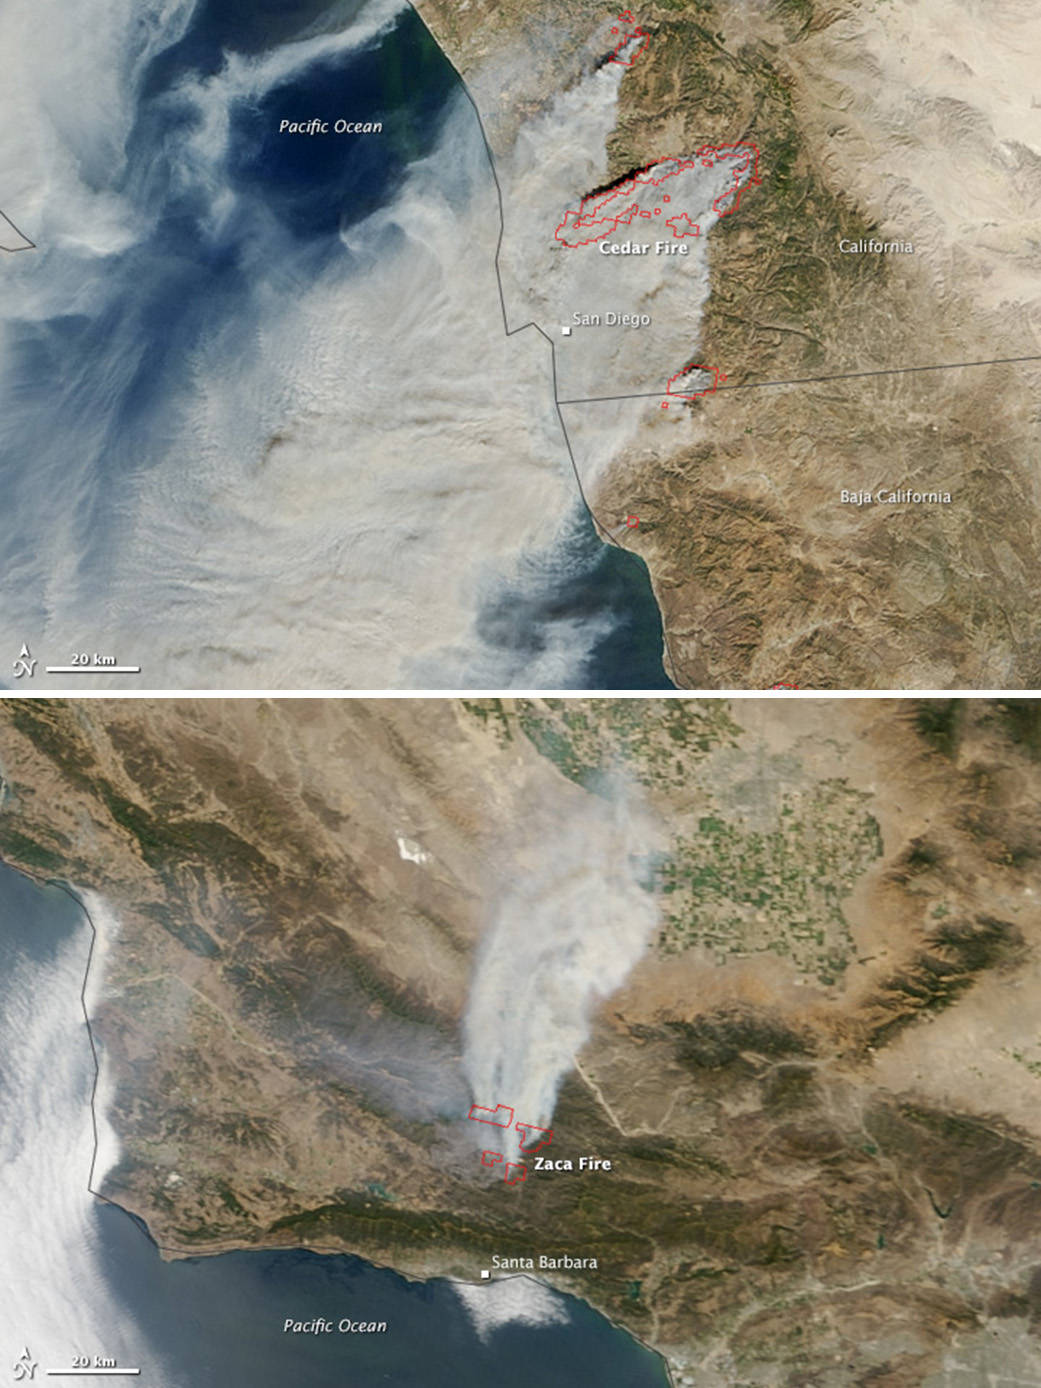 Two images of Santa Ana fires in Southern California